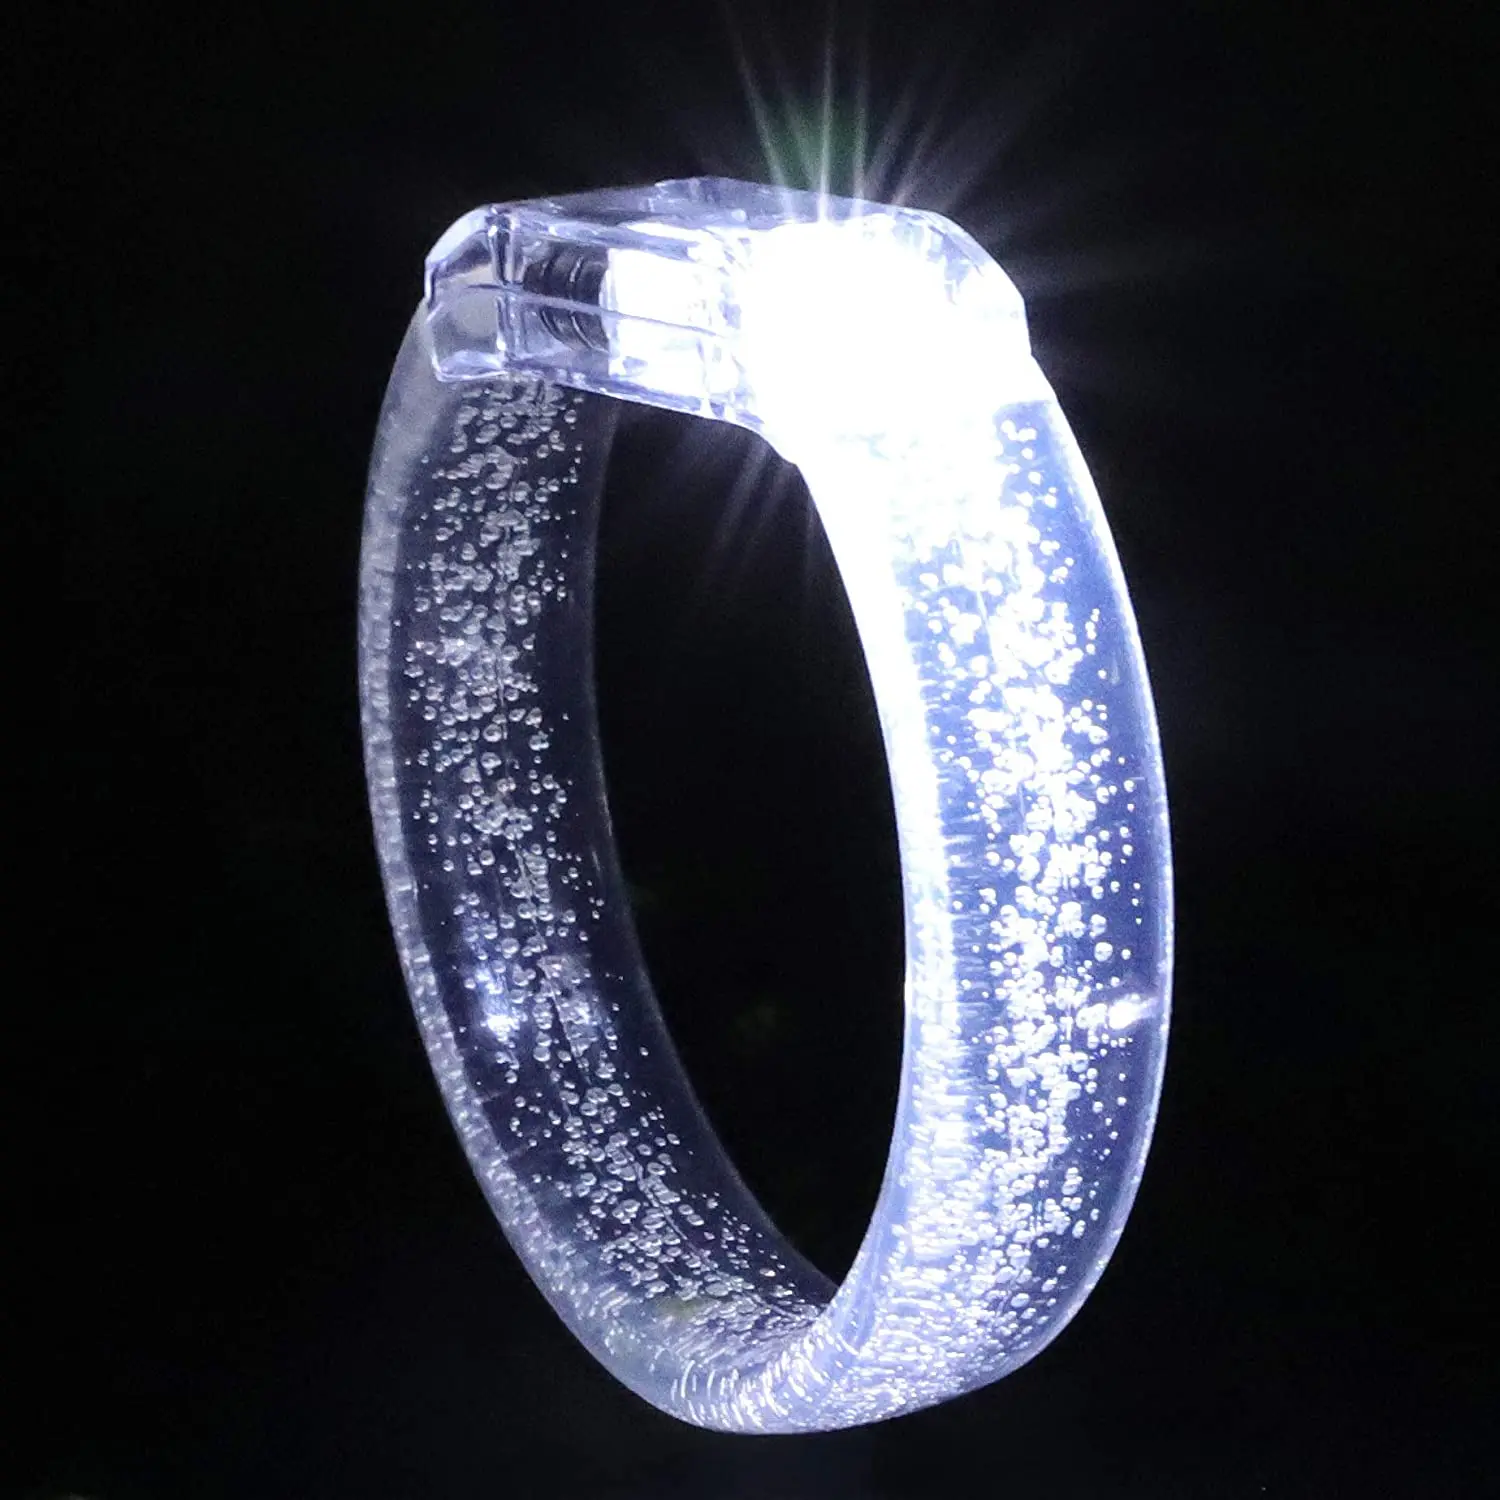 

24pcs Clear White Glow Wristbands LED Light up Bracelets Party Favors Toys Supplies for Birthday Halloween Carnivals Parties